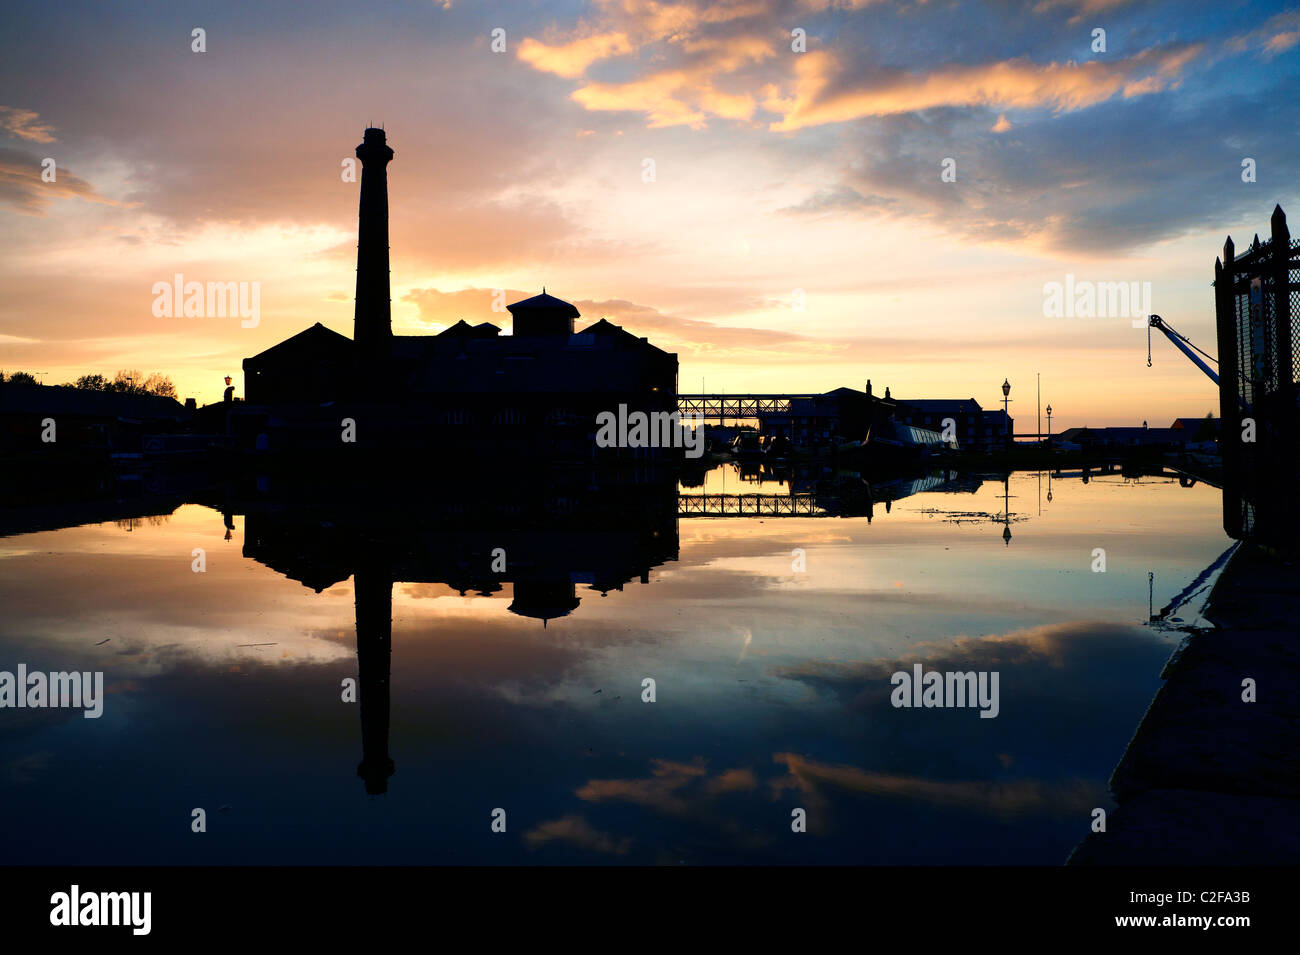 Ellesmere Port Boat Museum silhouetted during a colourful sunset Stock Photo